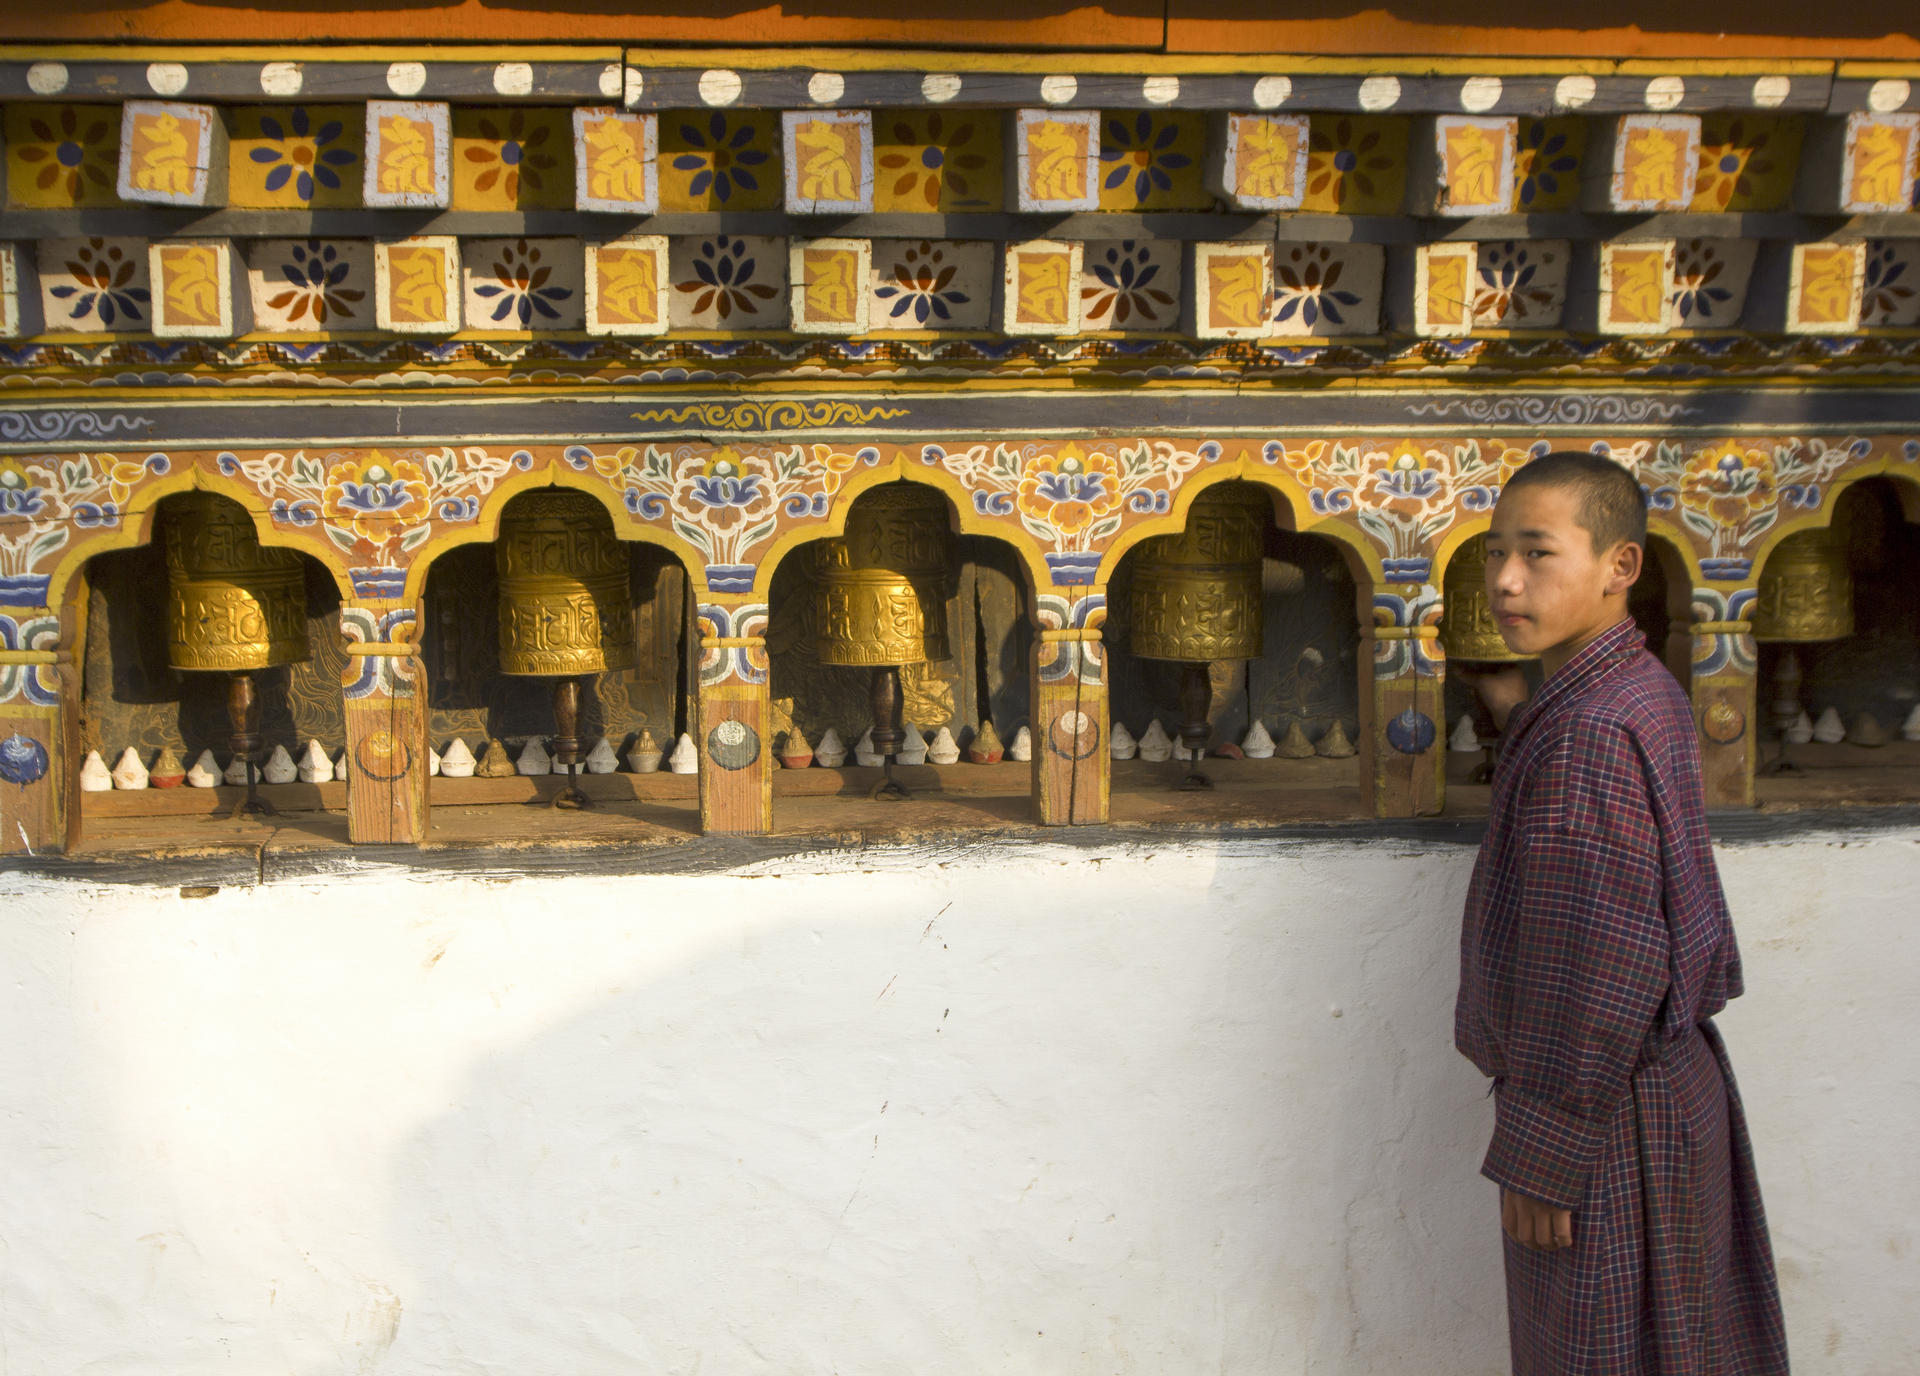 Chimi Lhakhang, the Divine Madman’s temple, in Punakha.